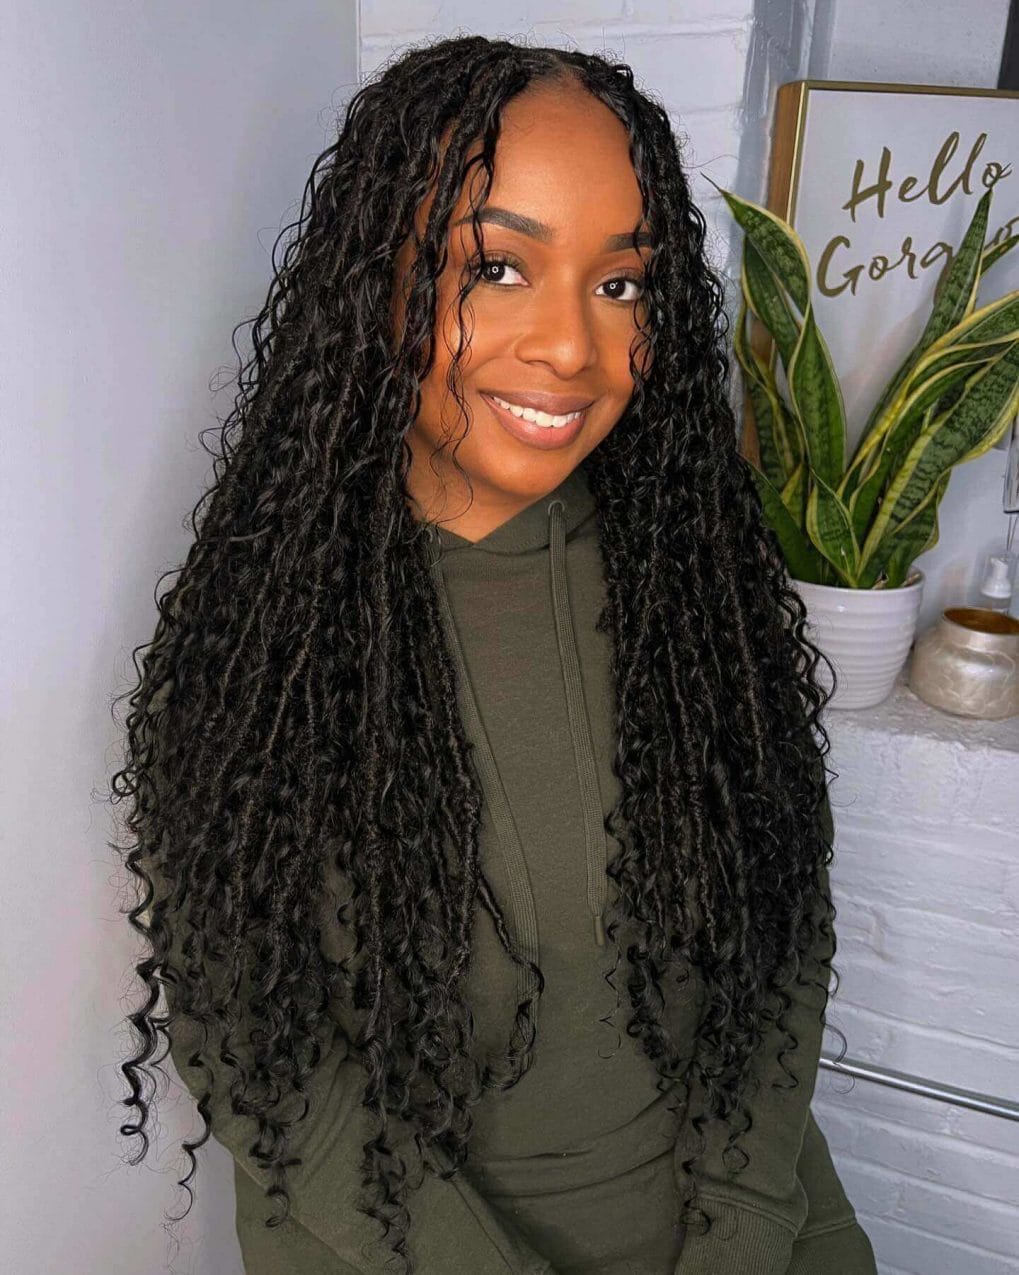 Fun, free cascading twist-outs adding length and definition